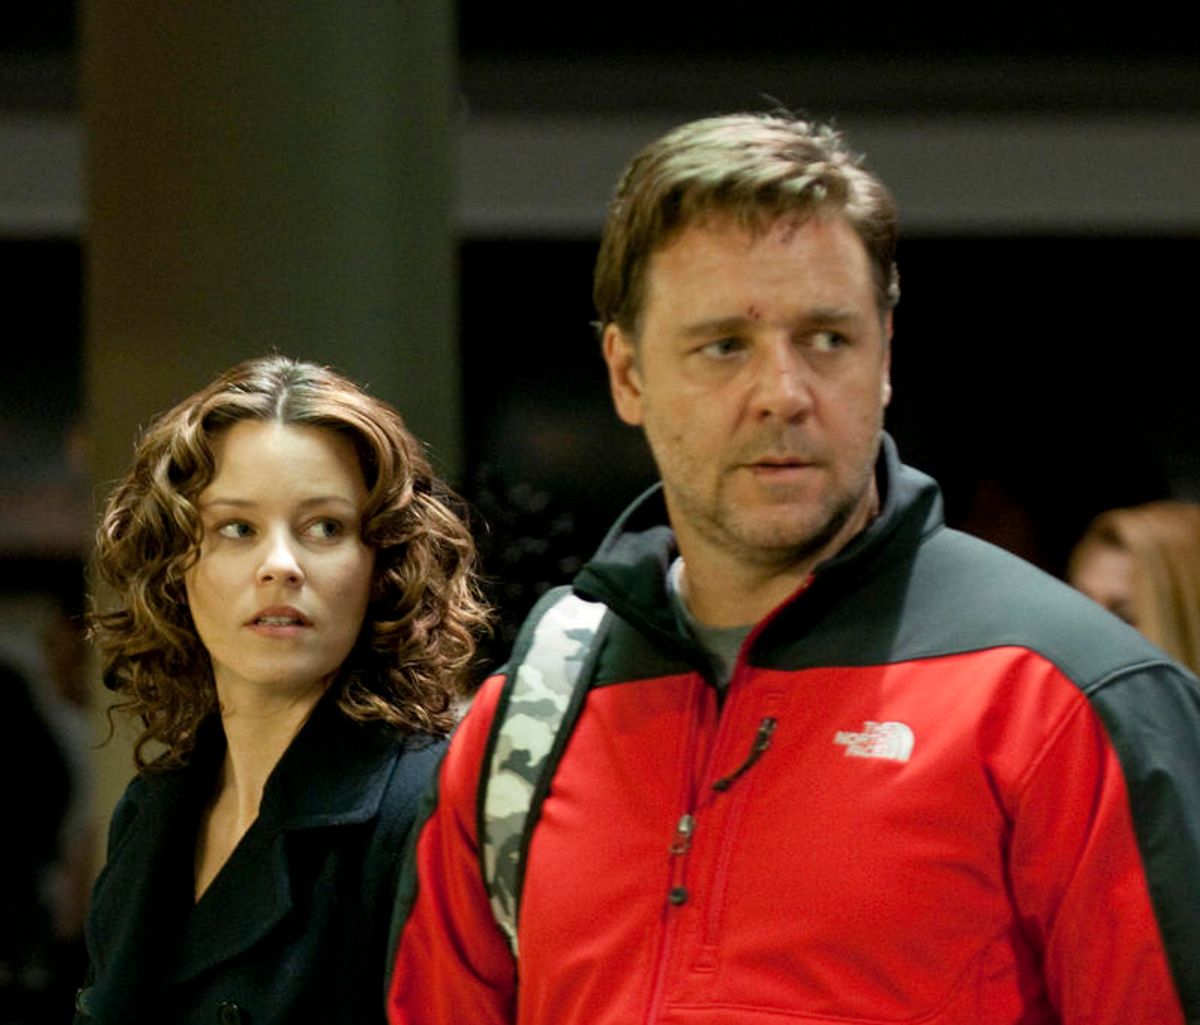 Elizabeth Banks and Russell Crowe in "The Next Three Days"